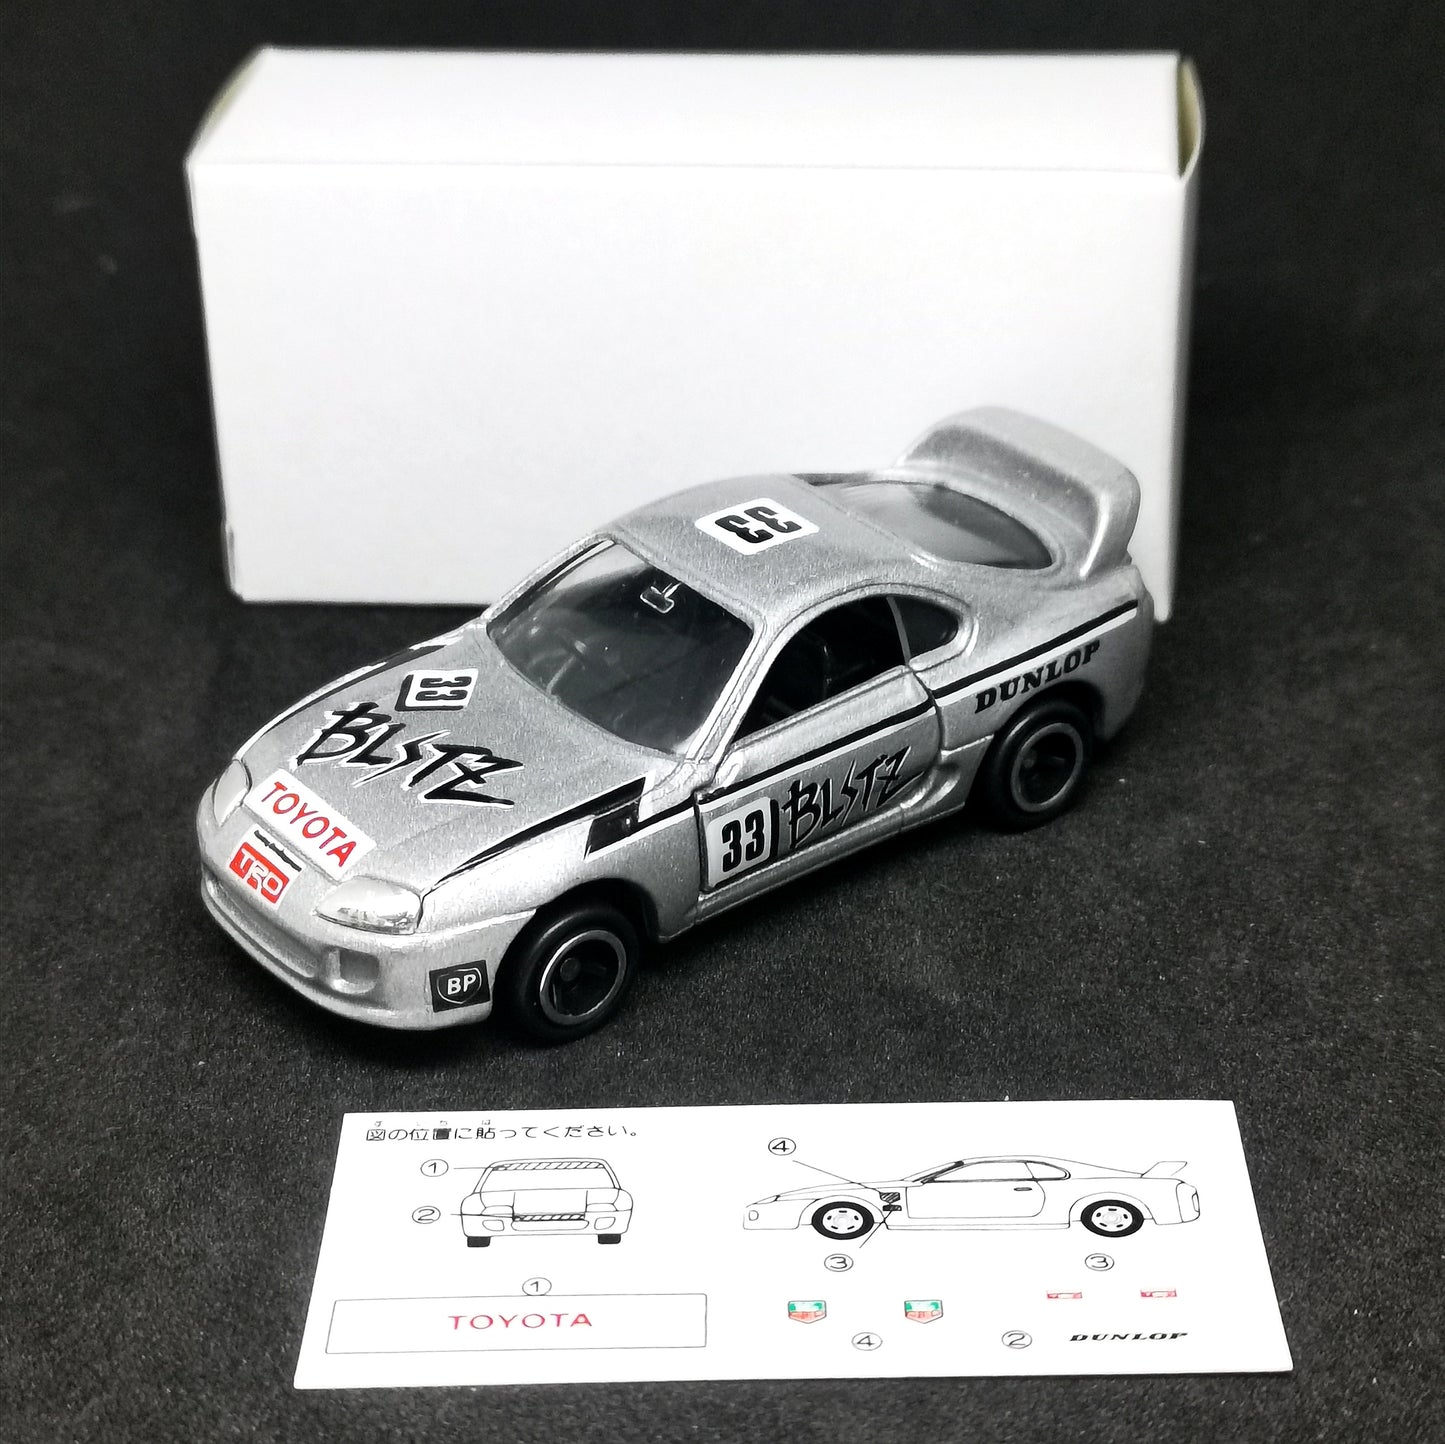 Tomica Gift Set 25th Anniversary Gift Set Toyota Supra ( separate from the Gift Set)